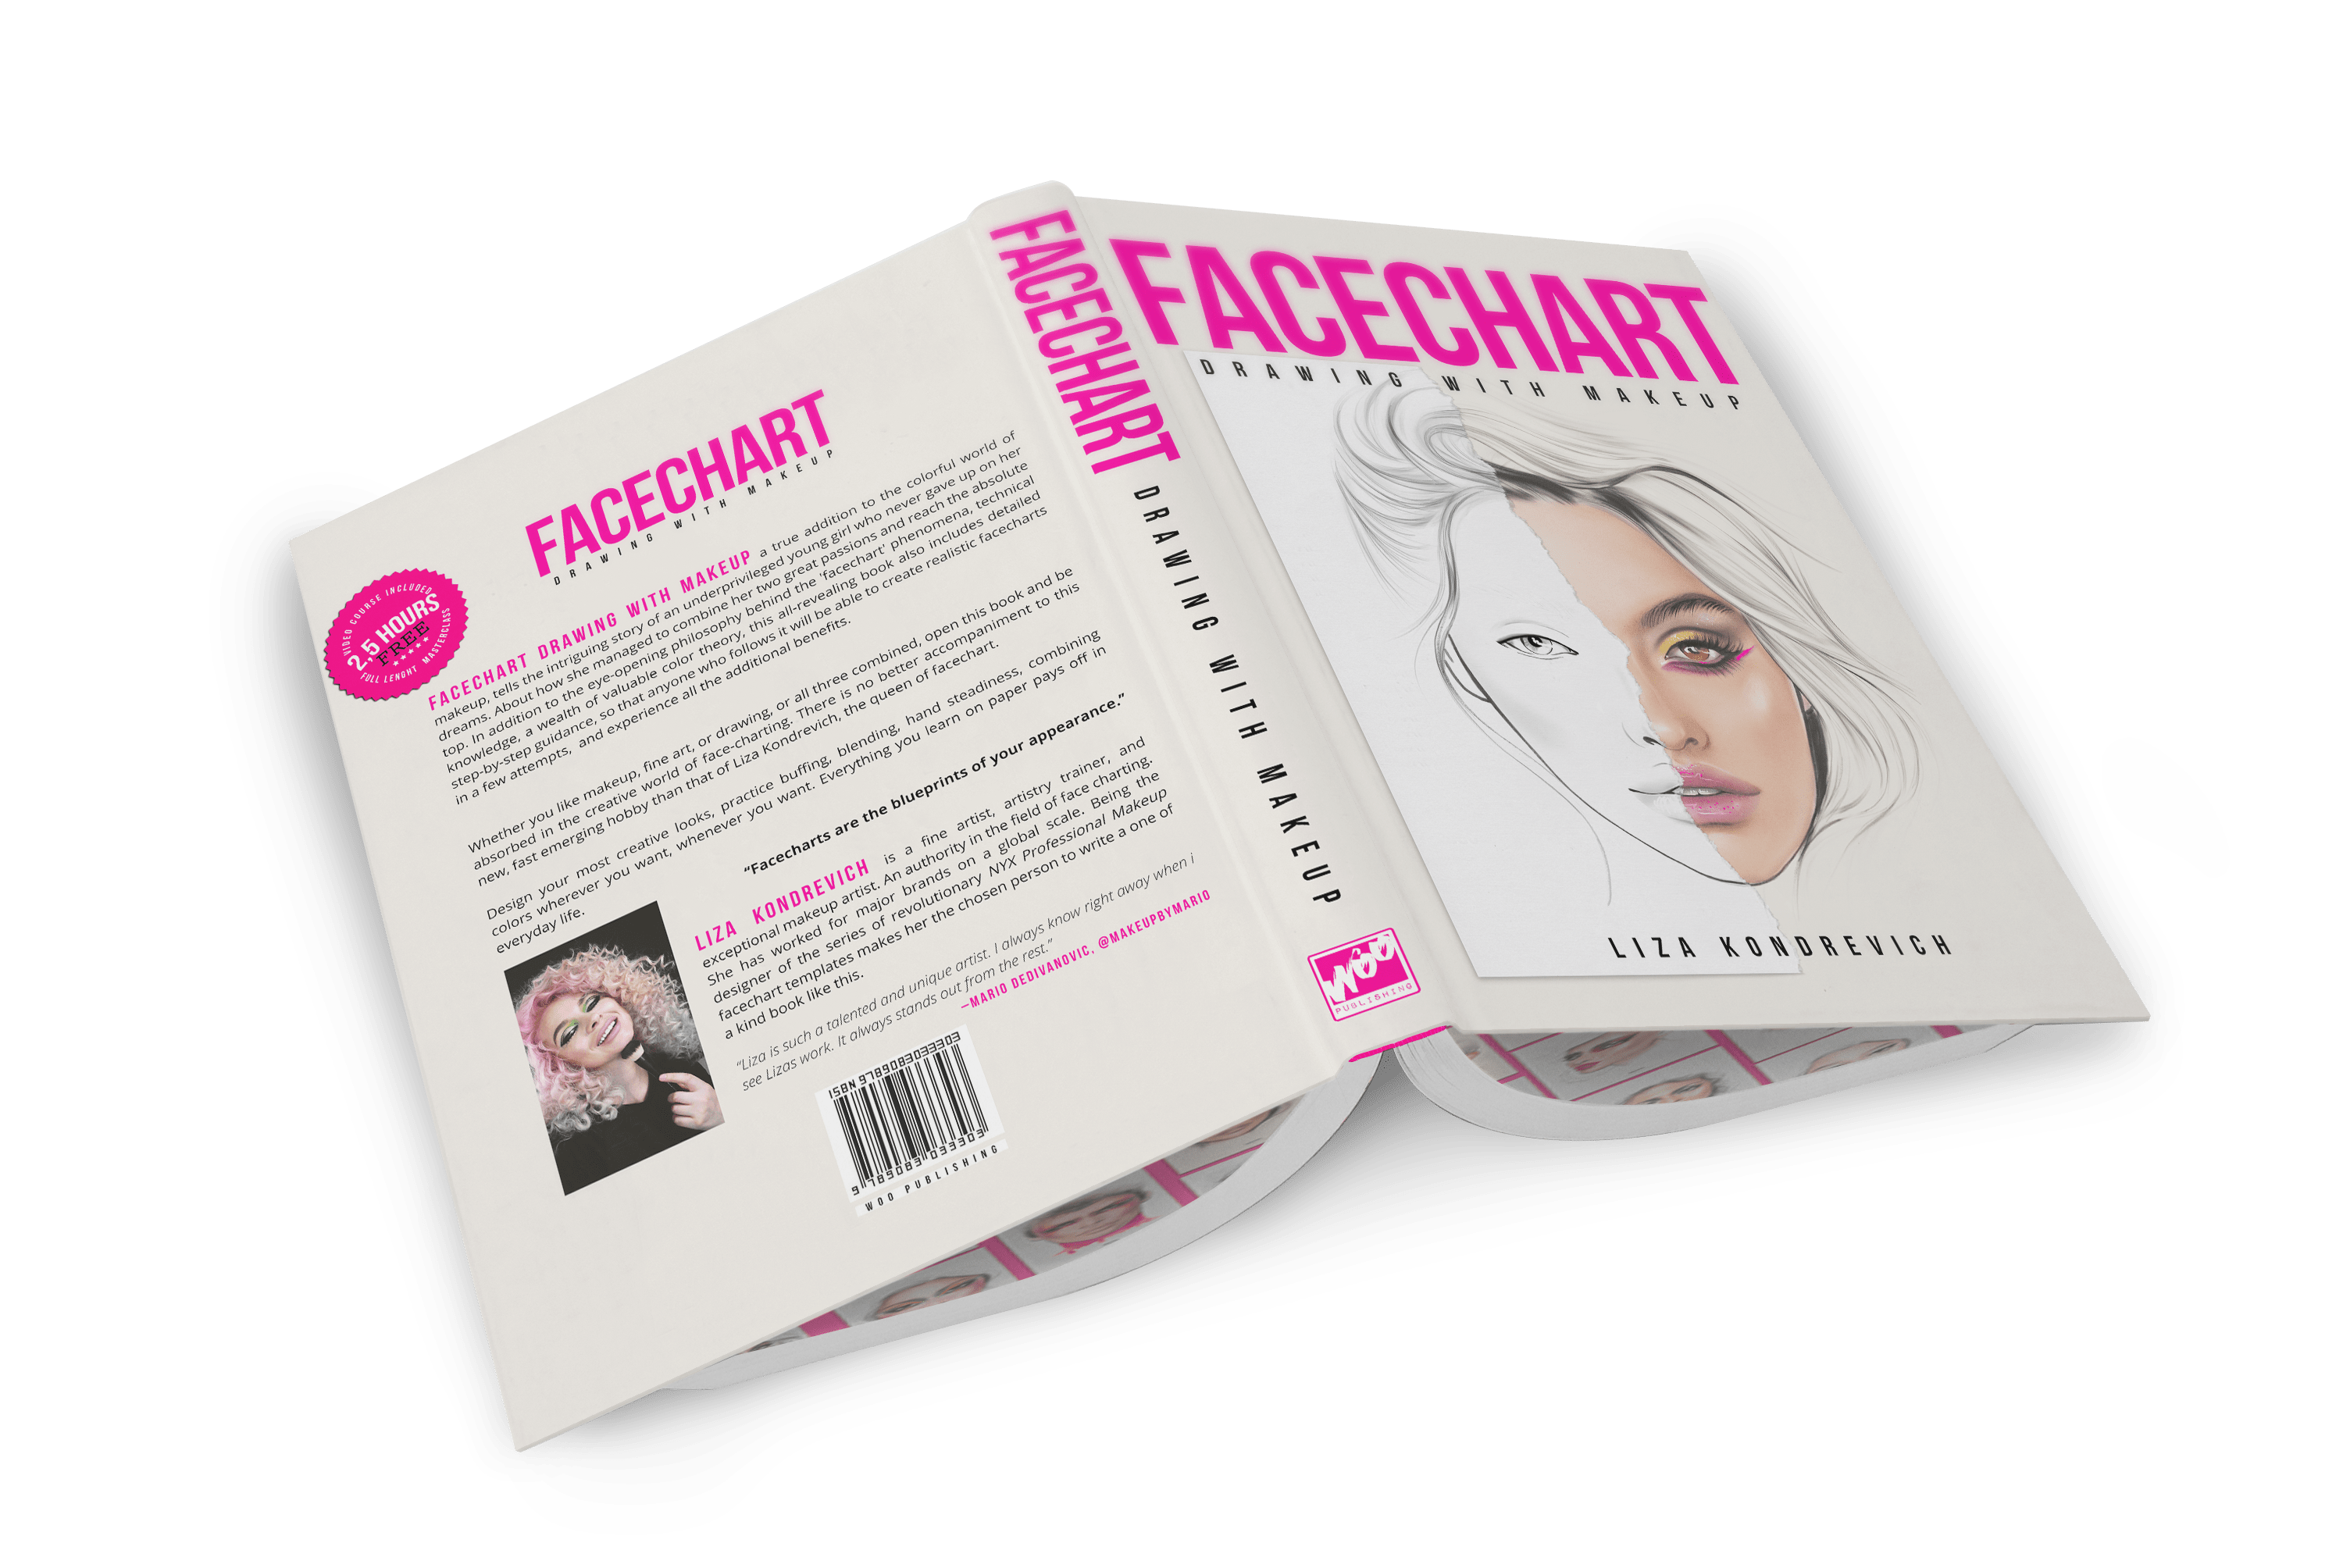 Liza Kondrevich Facechart - Drawing With Makeup Book Review